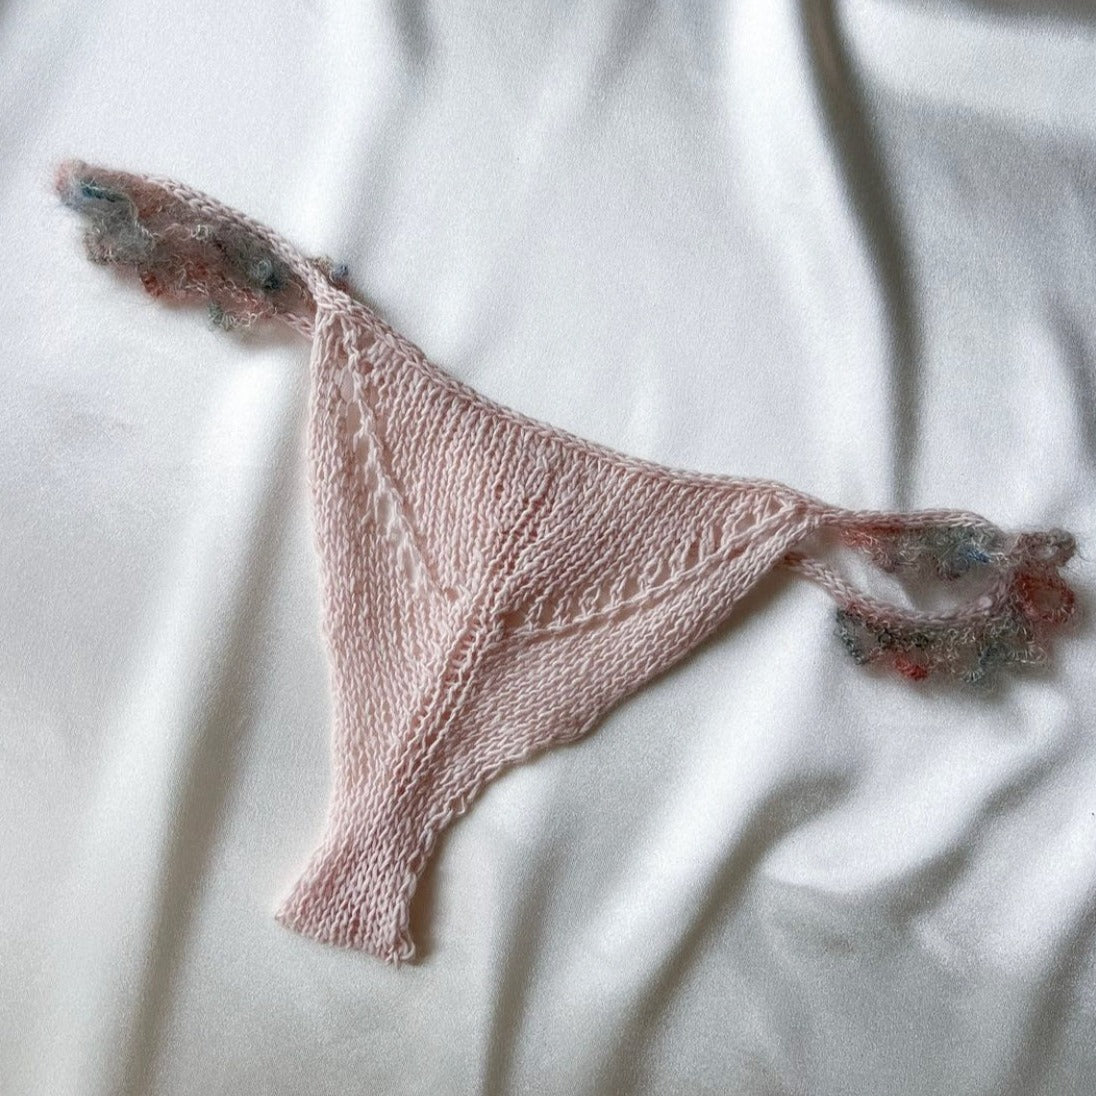 Valentines Special Thong Pattern Download - Qing Fibre